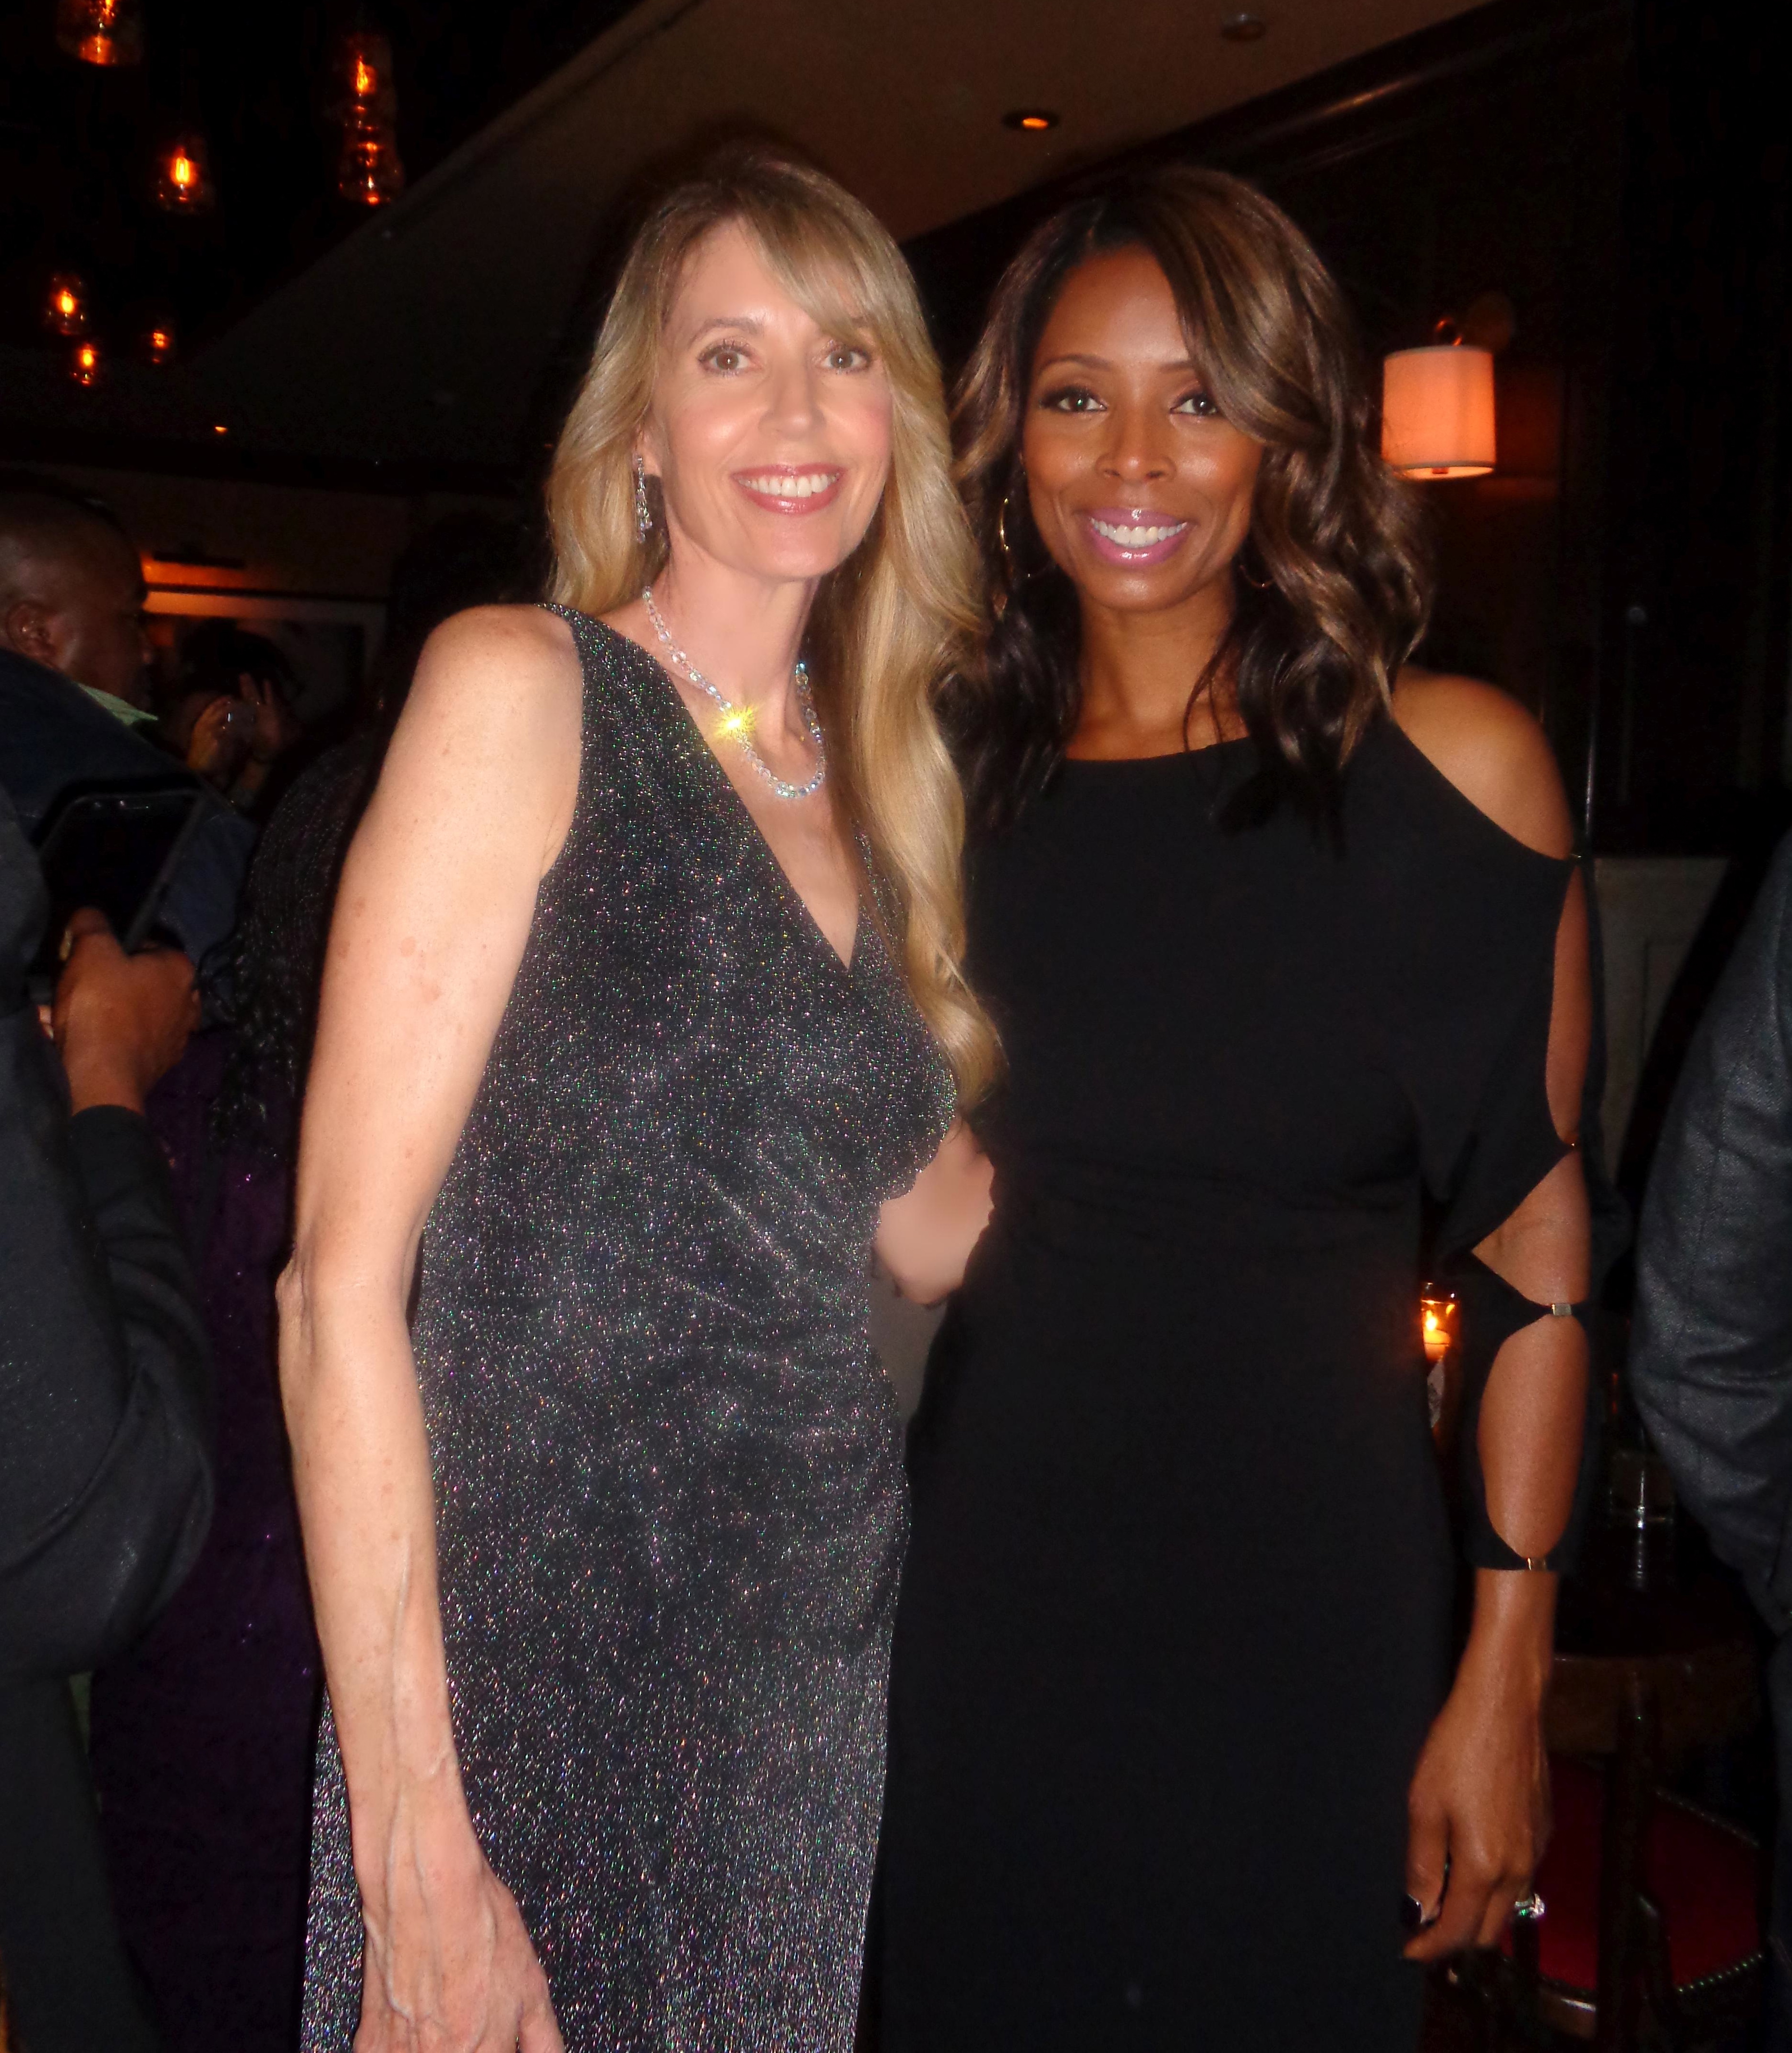 With Tasha Smith at the NYC premiere and after-party for ADDICTED. 10/8/14